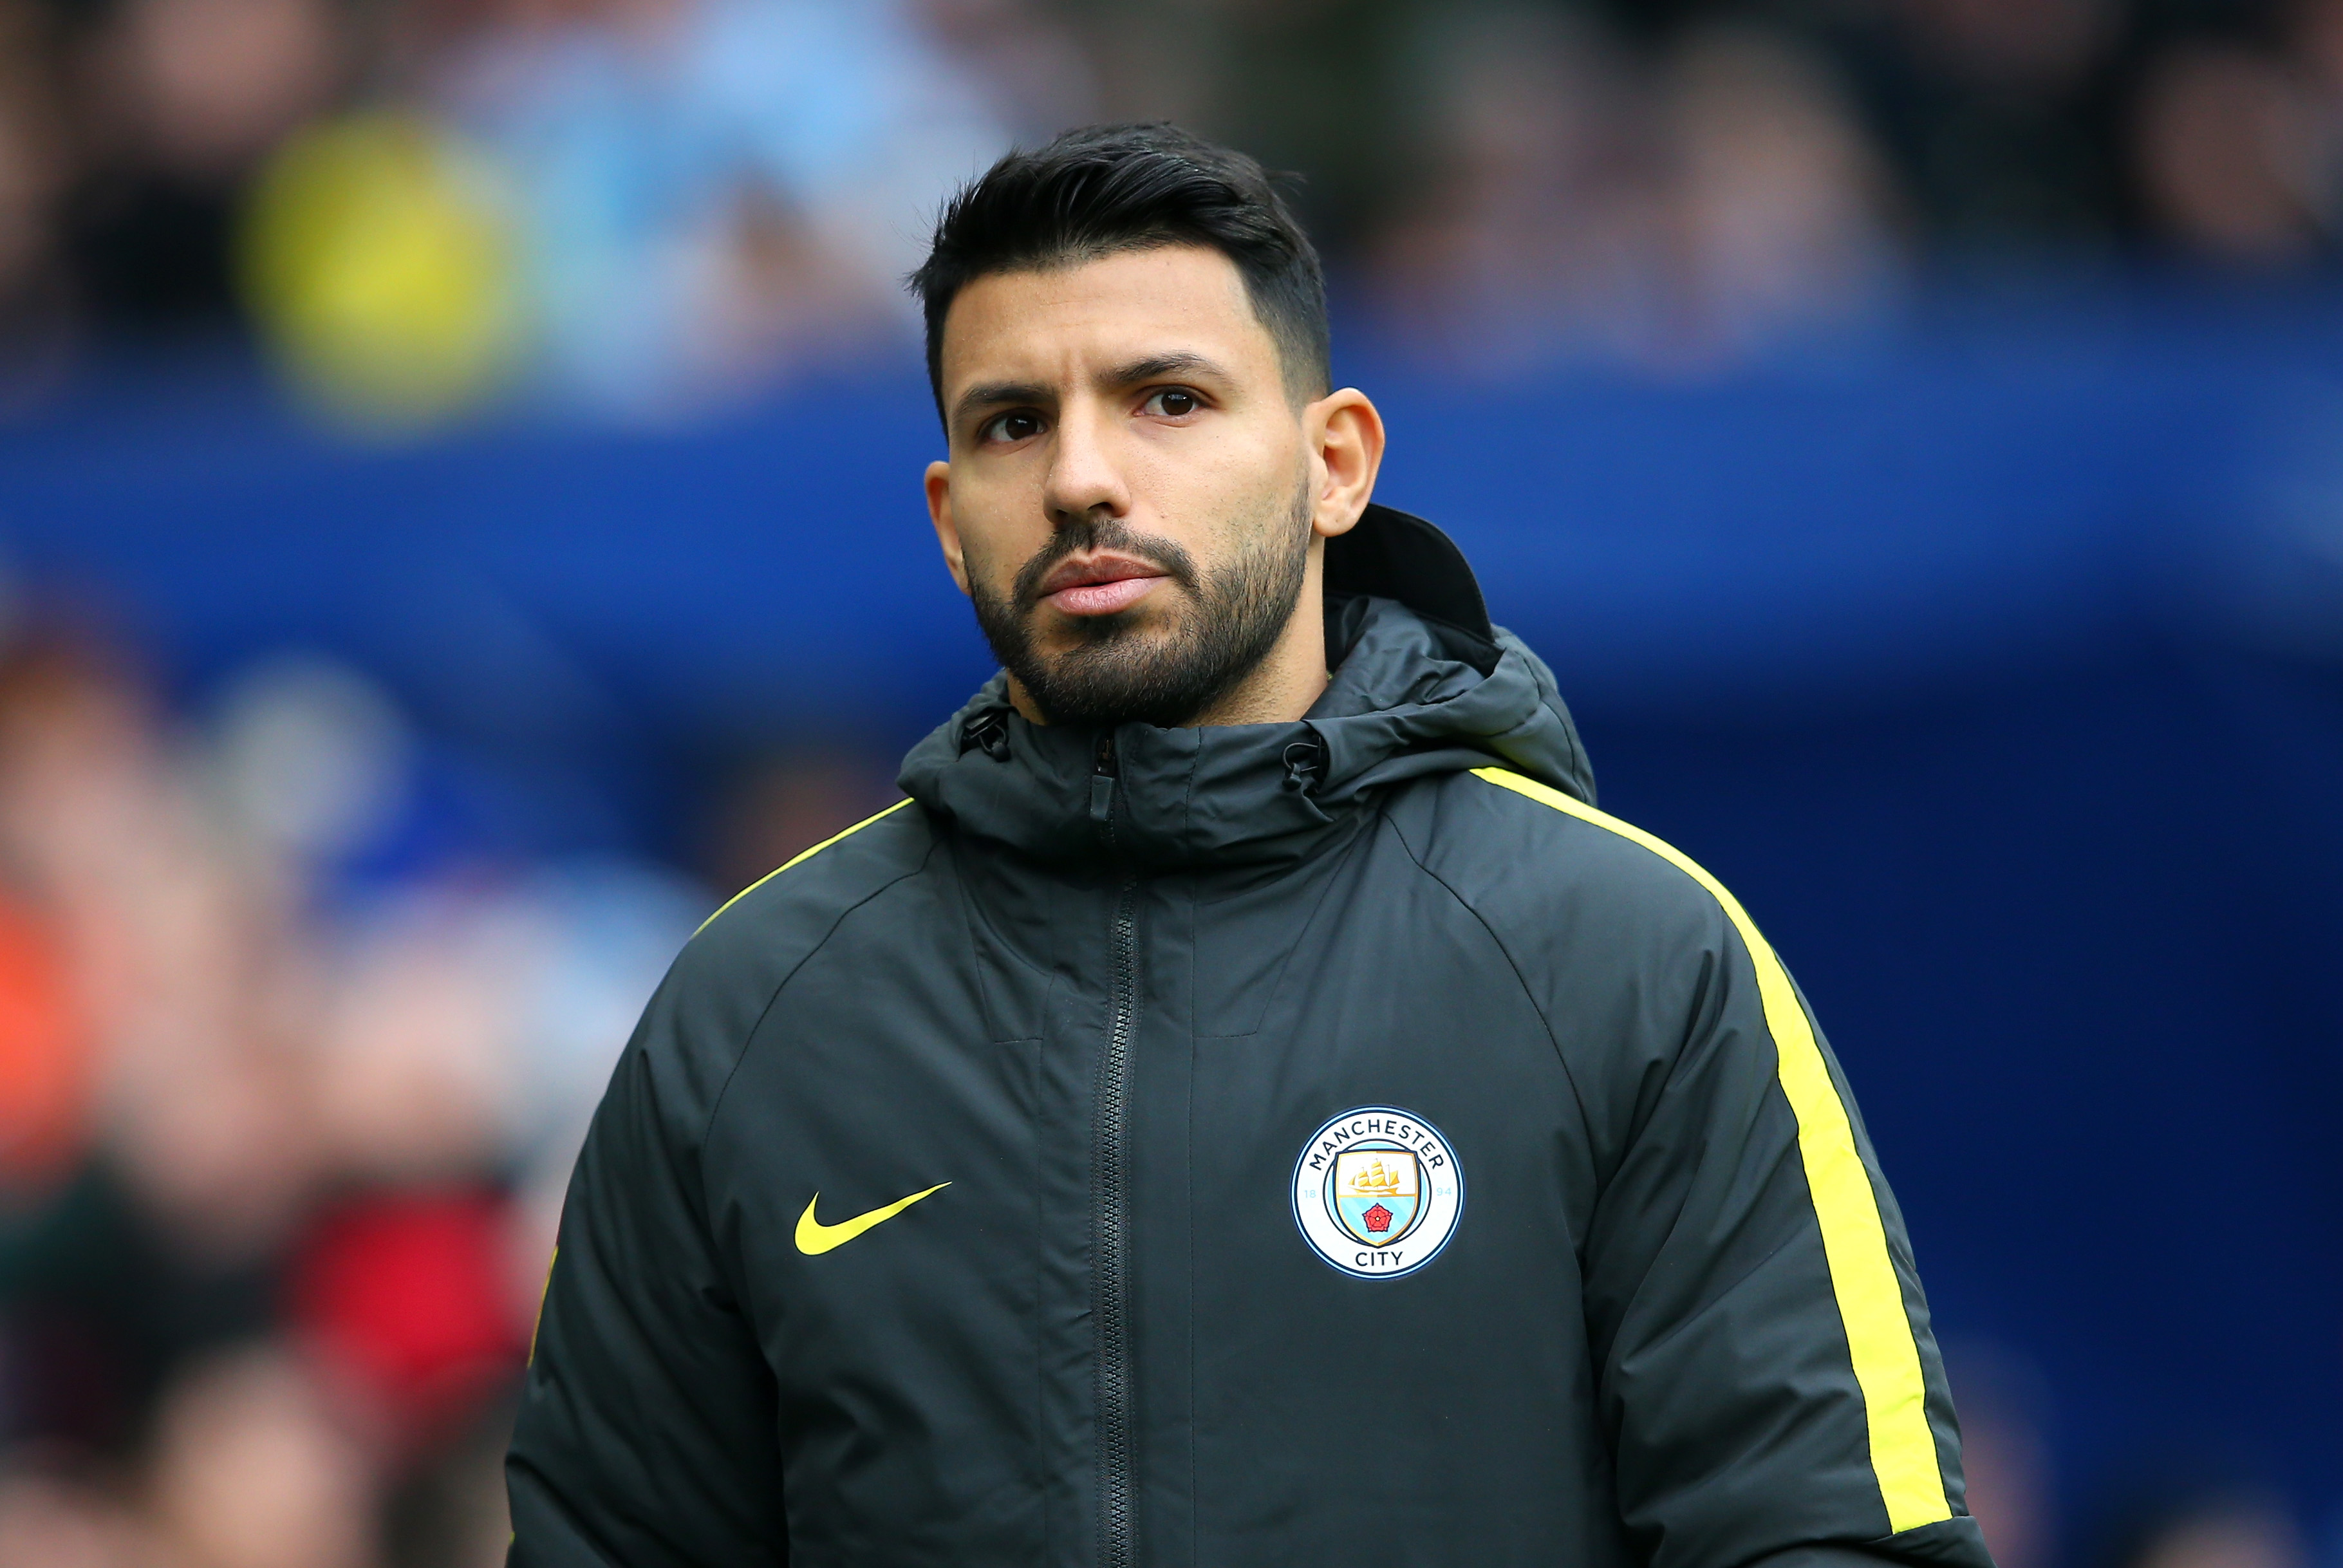 Pep Guardiola: “I hope Sergio Aguero stays with Manchester City but no idea what will happen”